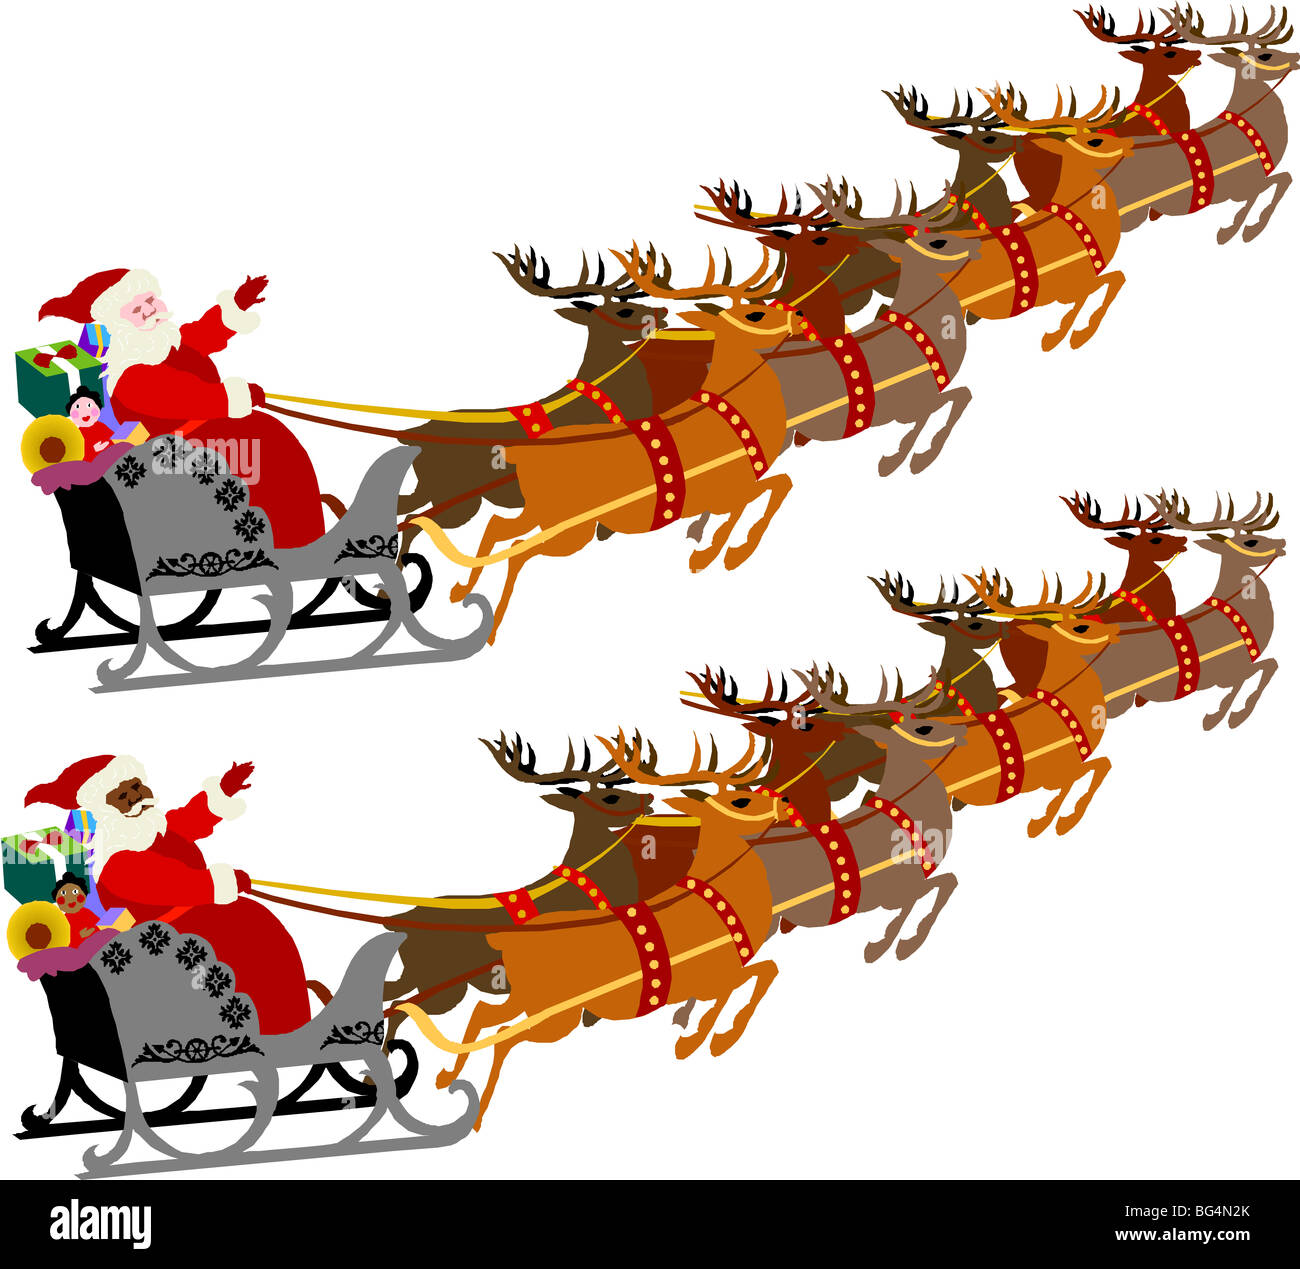 Santa with Sleigh and Reindeer, vector illustration of 2 versions. Stock Photo